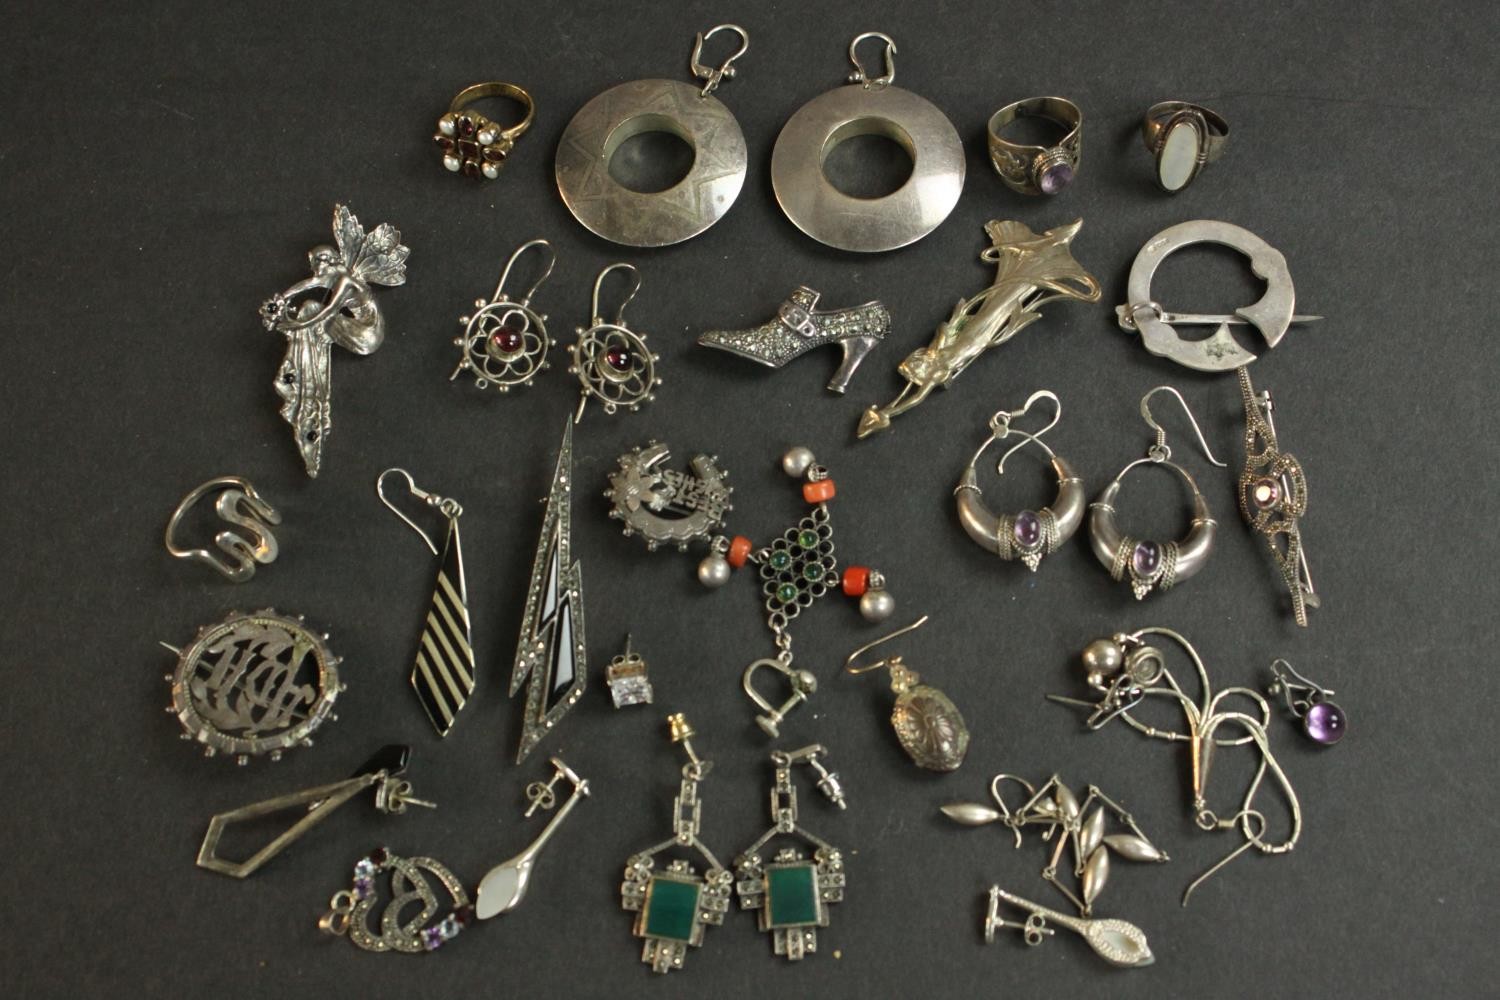 A large collection of silver and gemset jewellery, including amethyst and silver earrings, a pair of